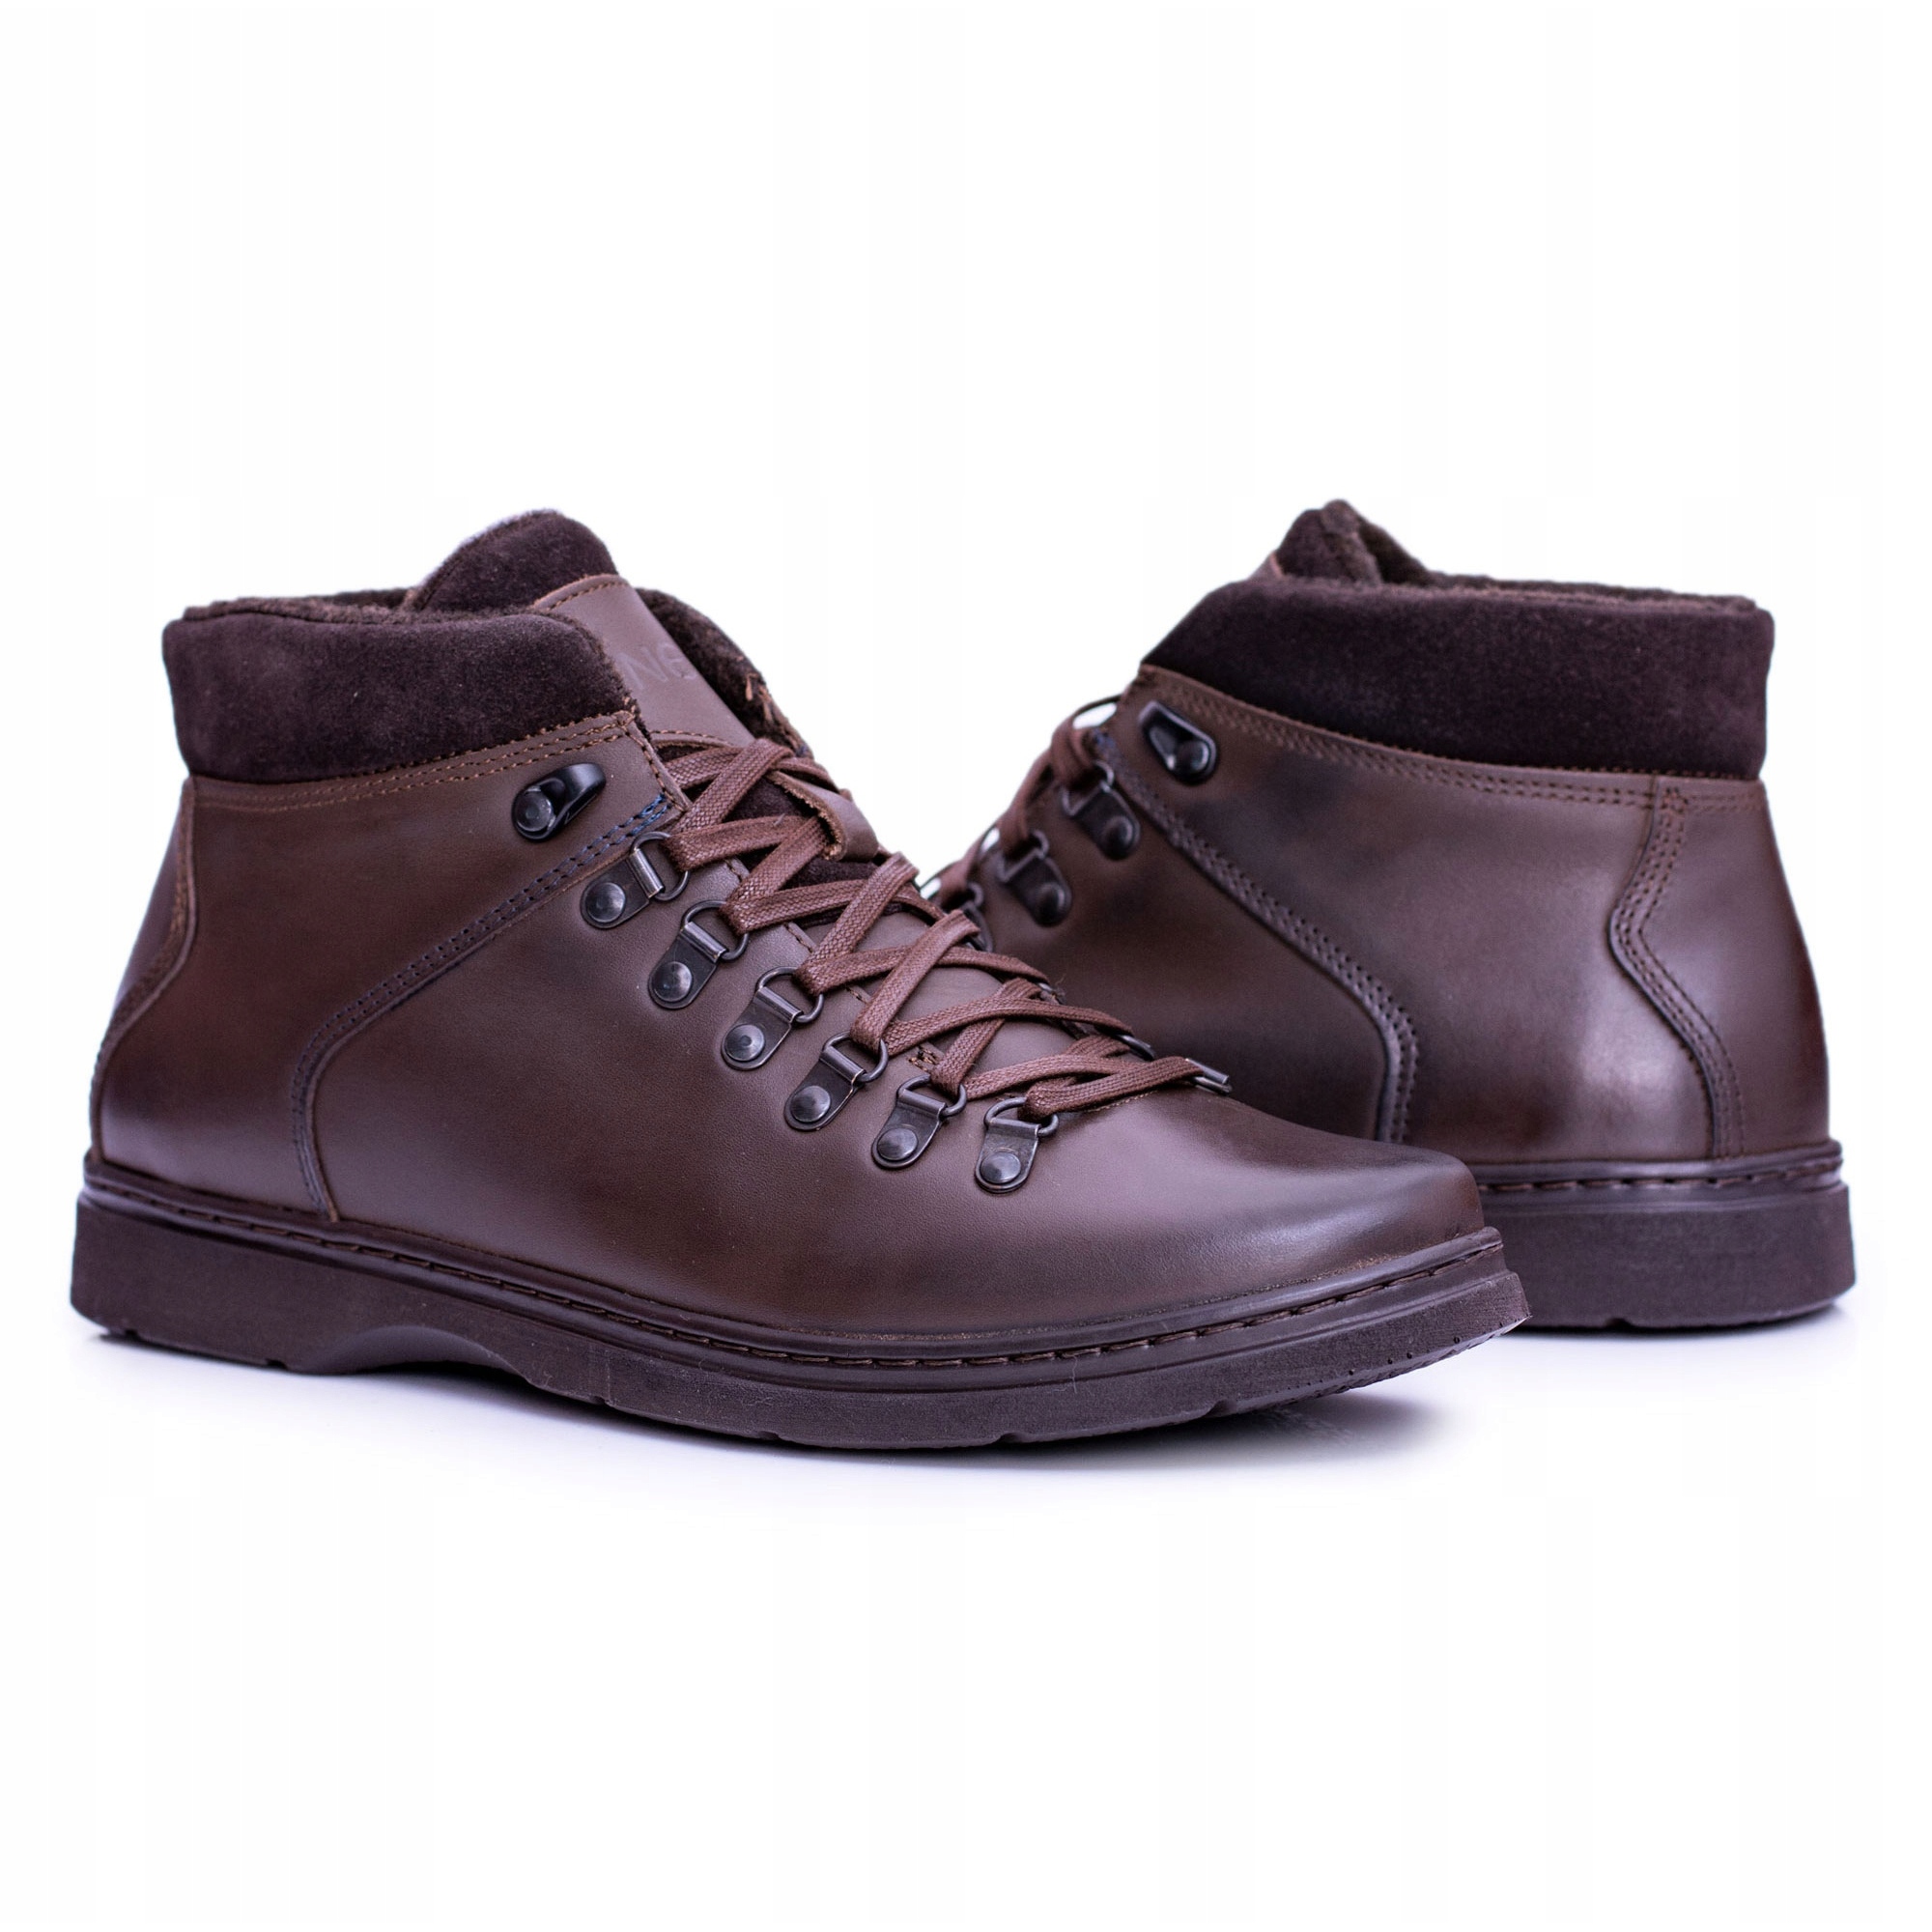 Neex Brown Leather Men's Insulated 